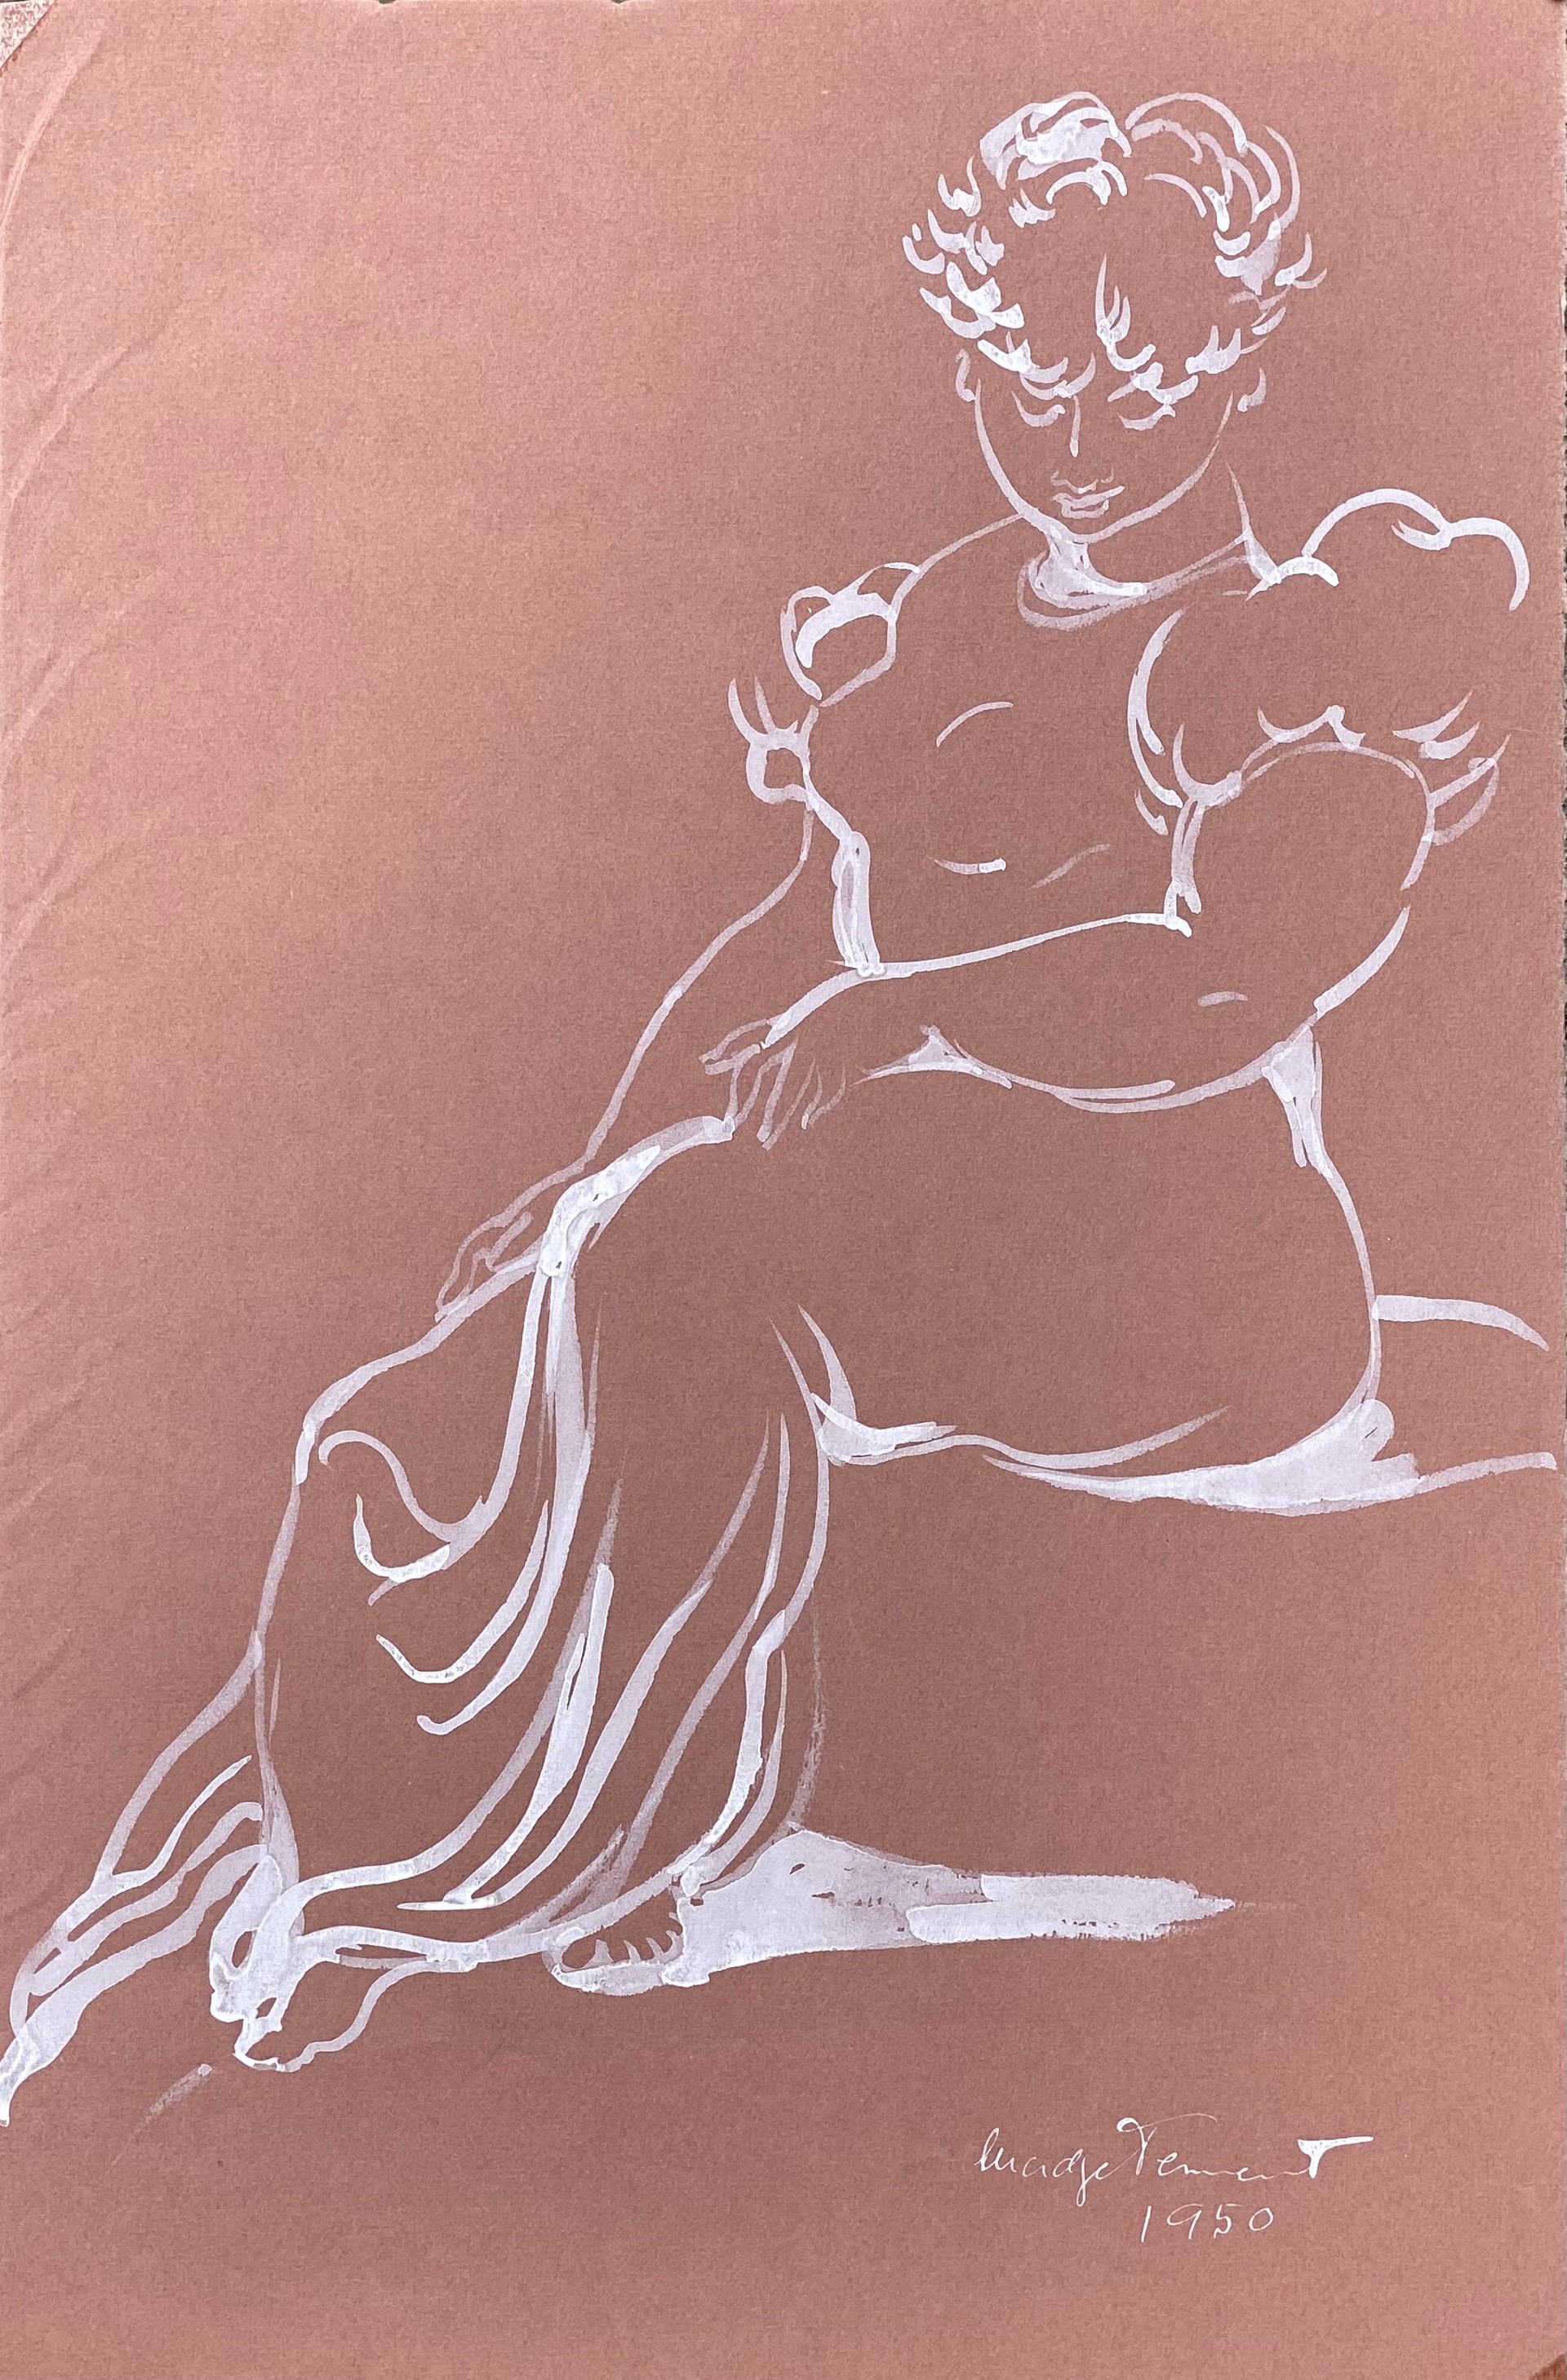 Untitled, Seated Hawaiian Woman by Madge Tennent